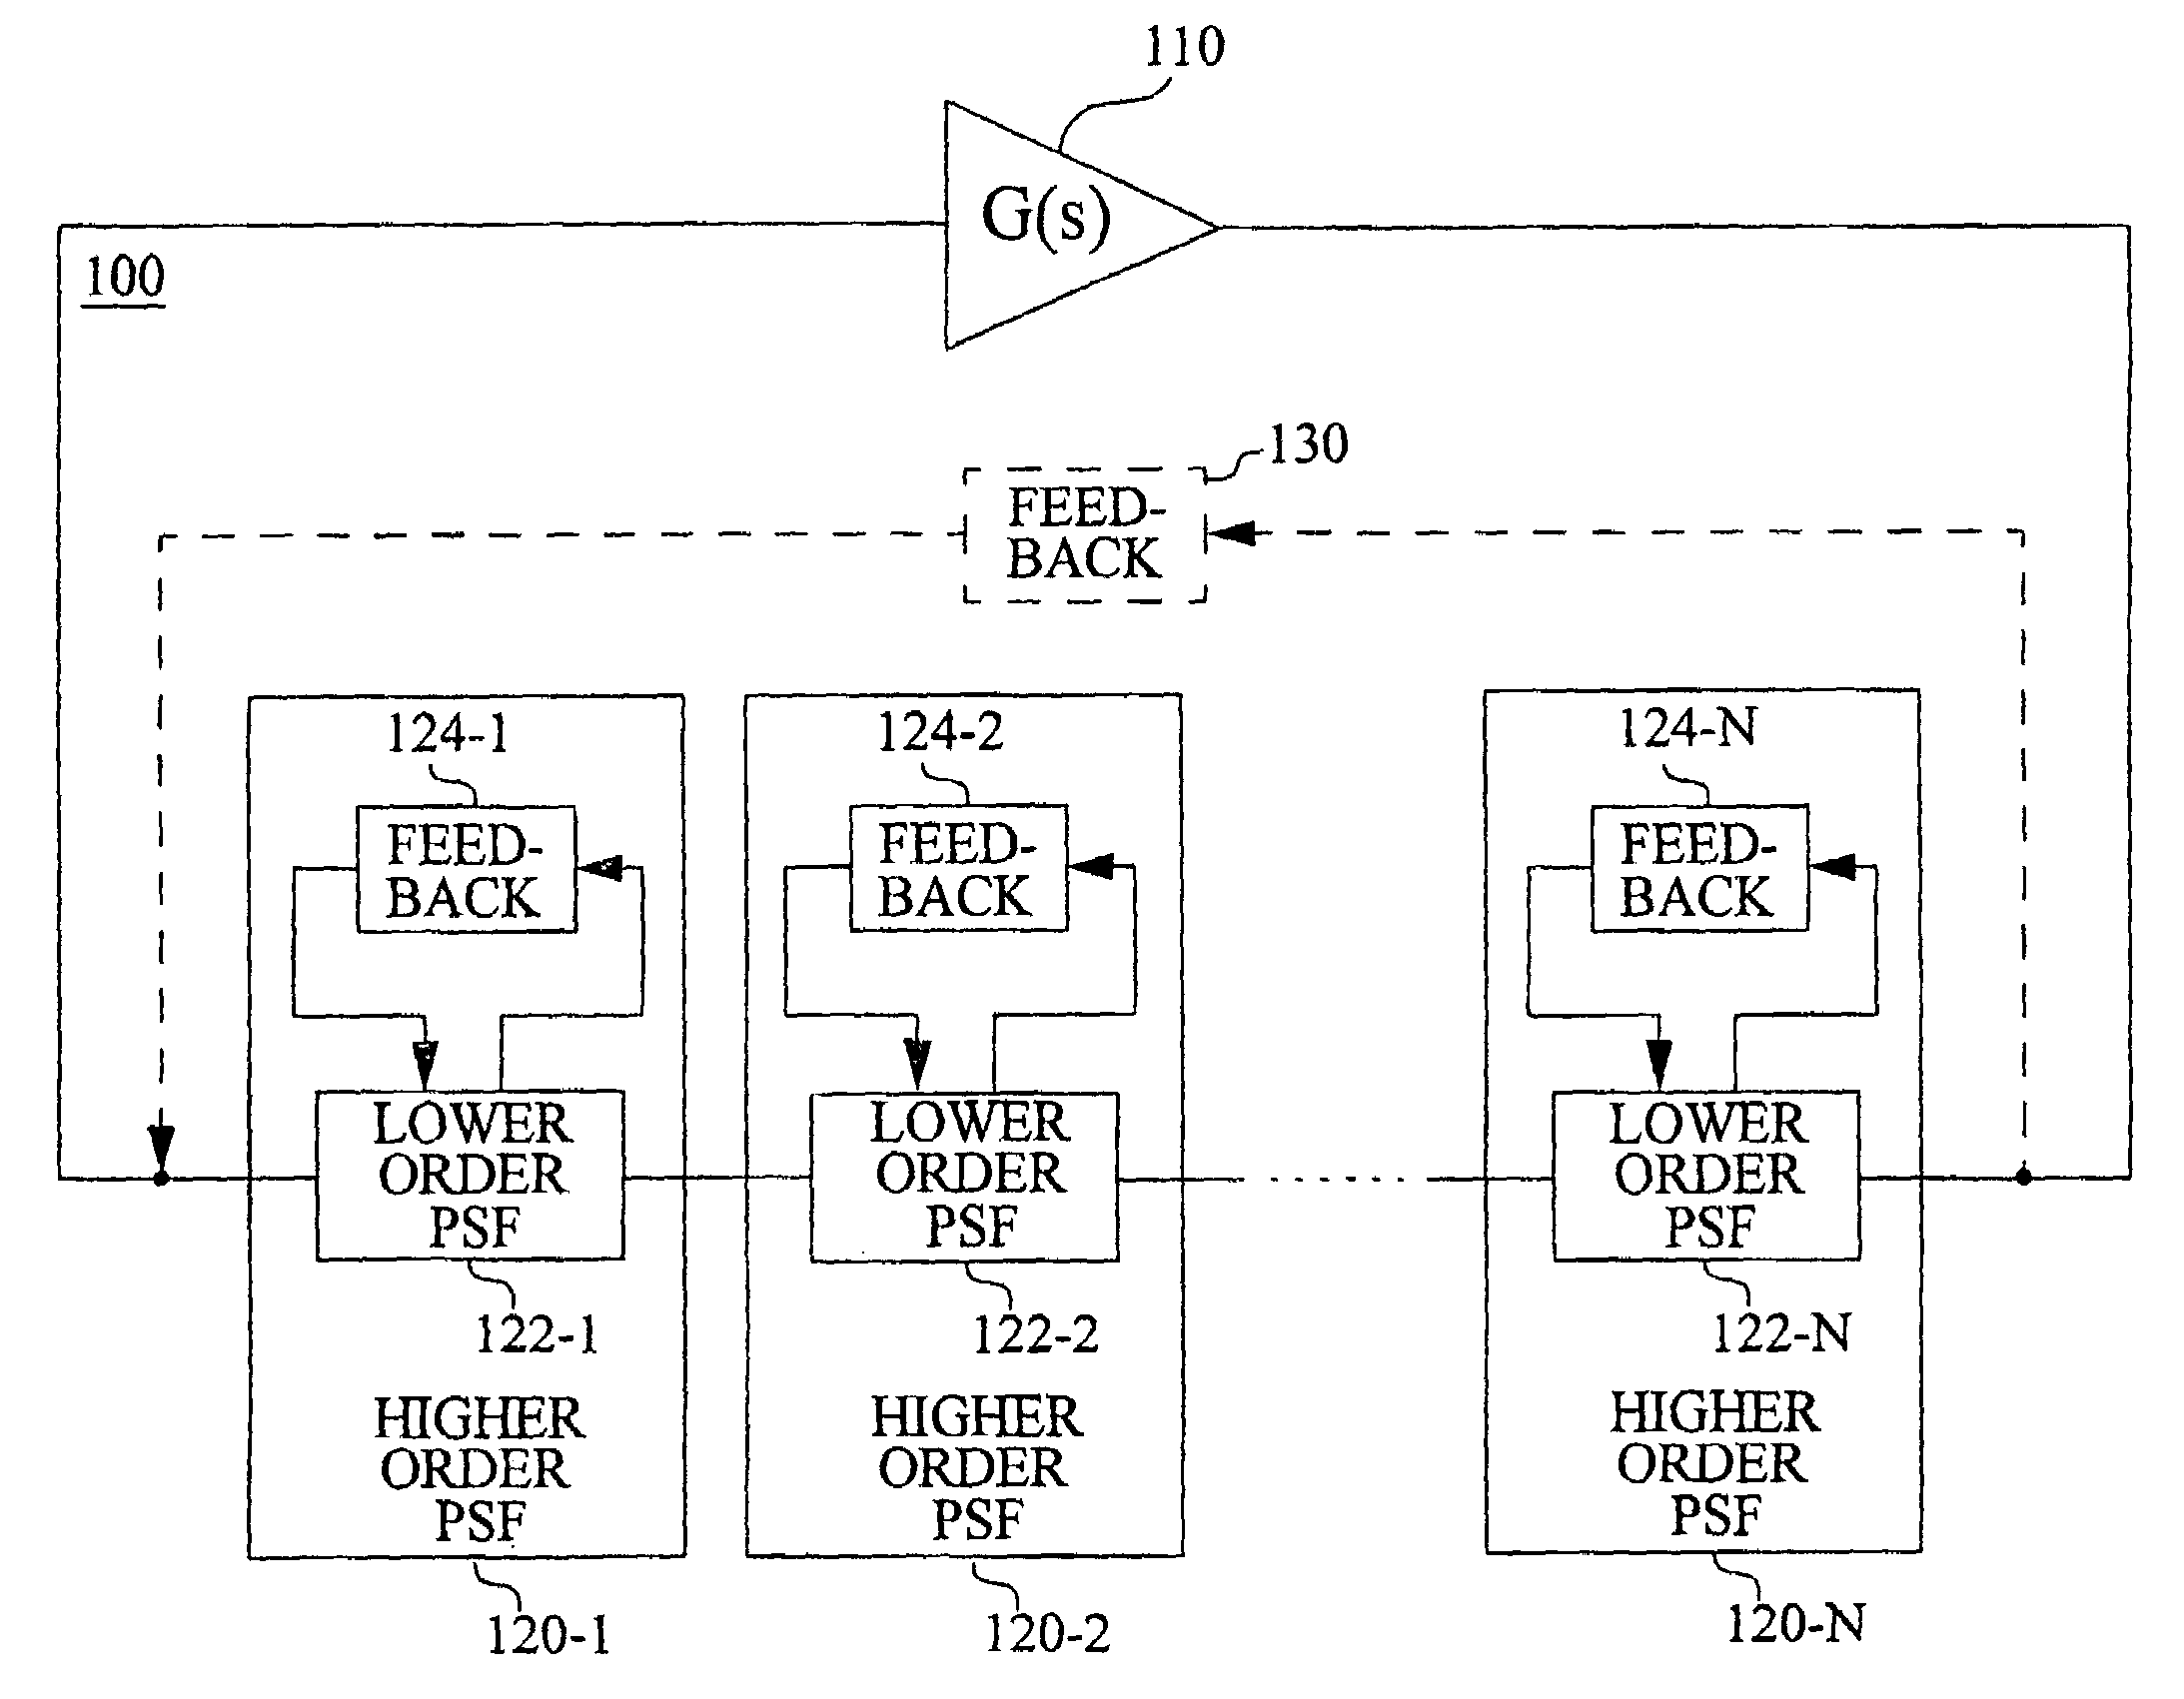 Oscillators with active higher-in-order phase shift filtering